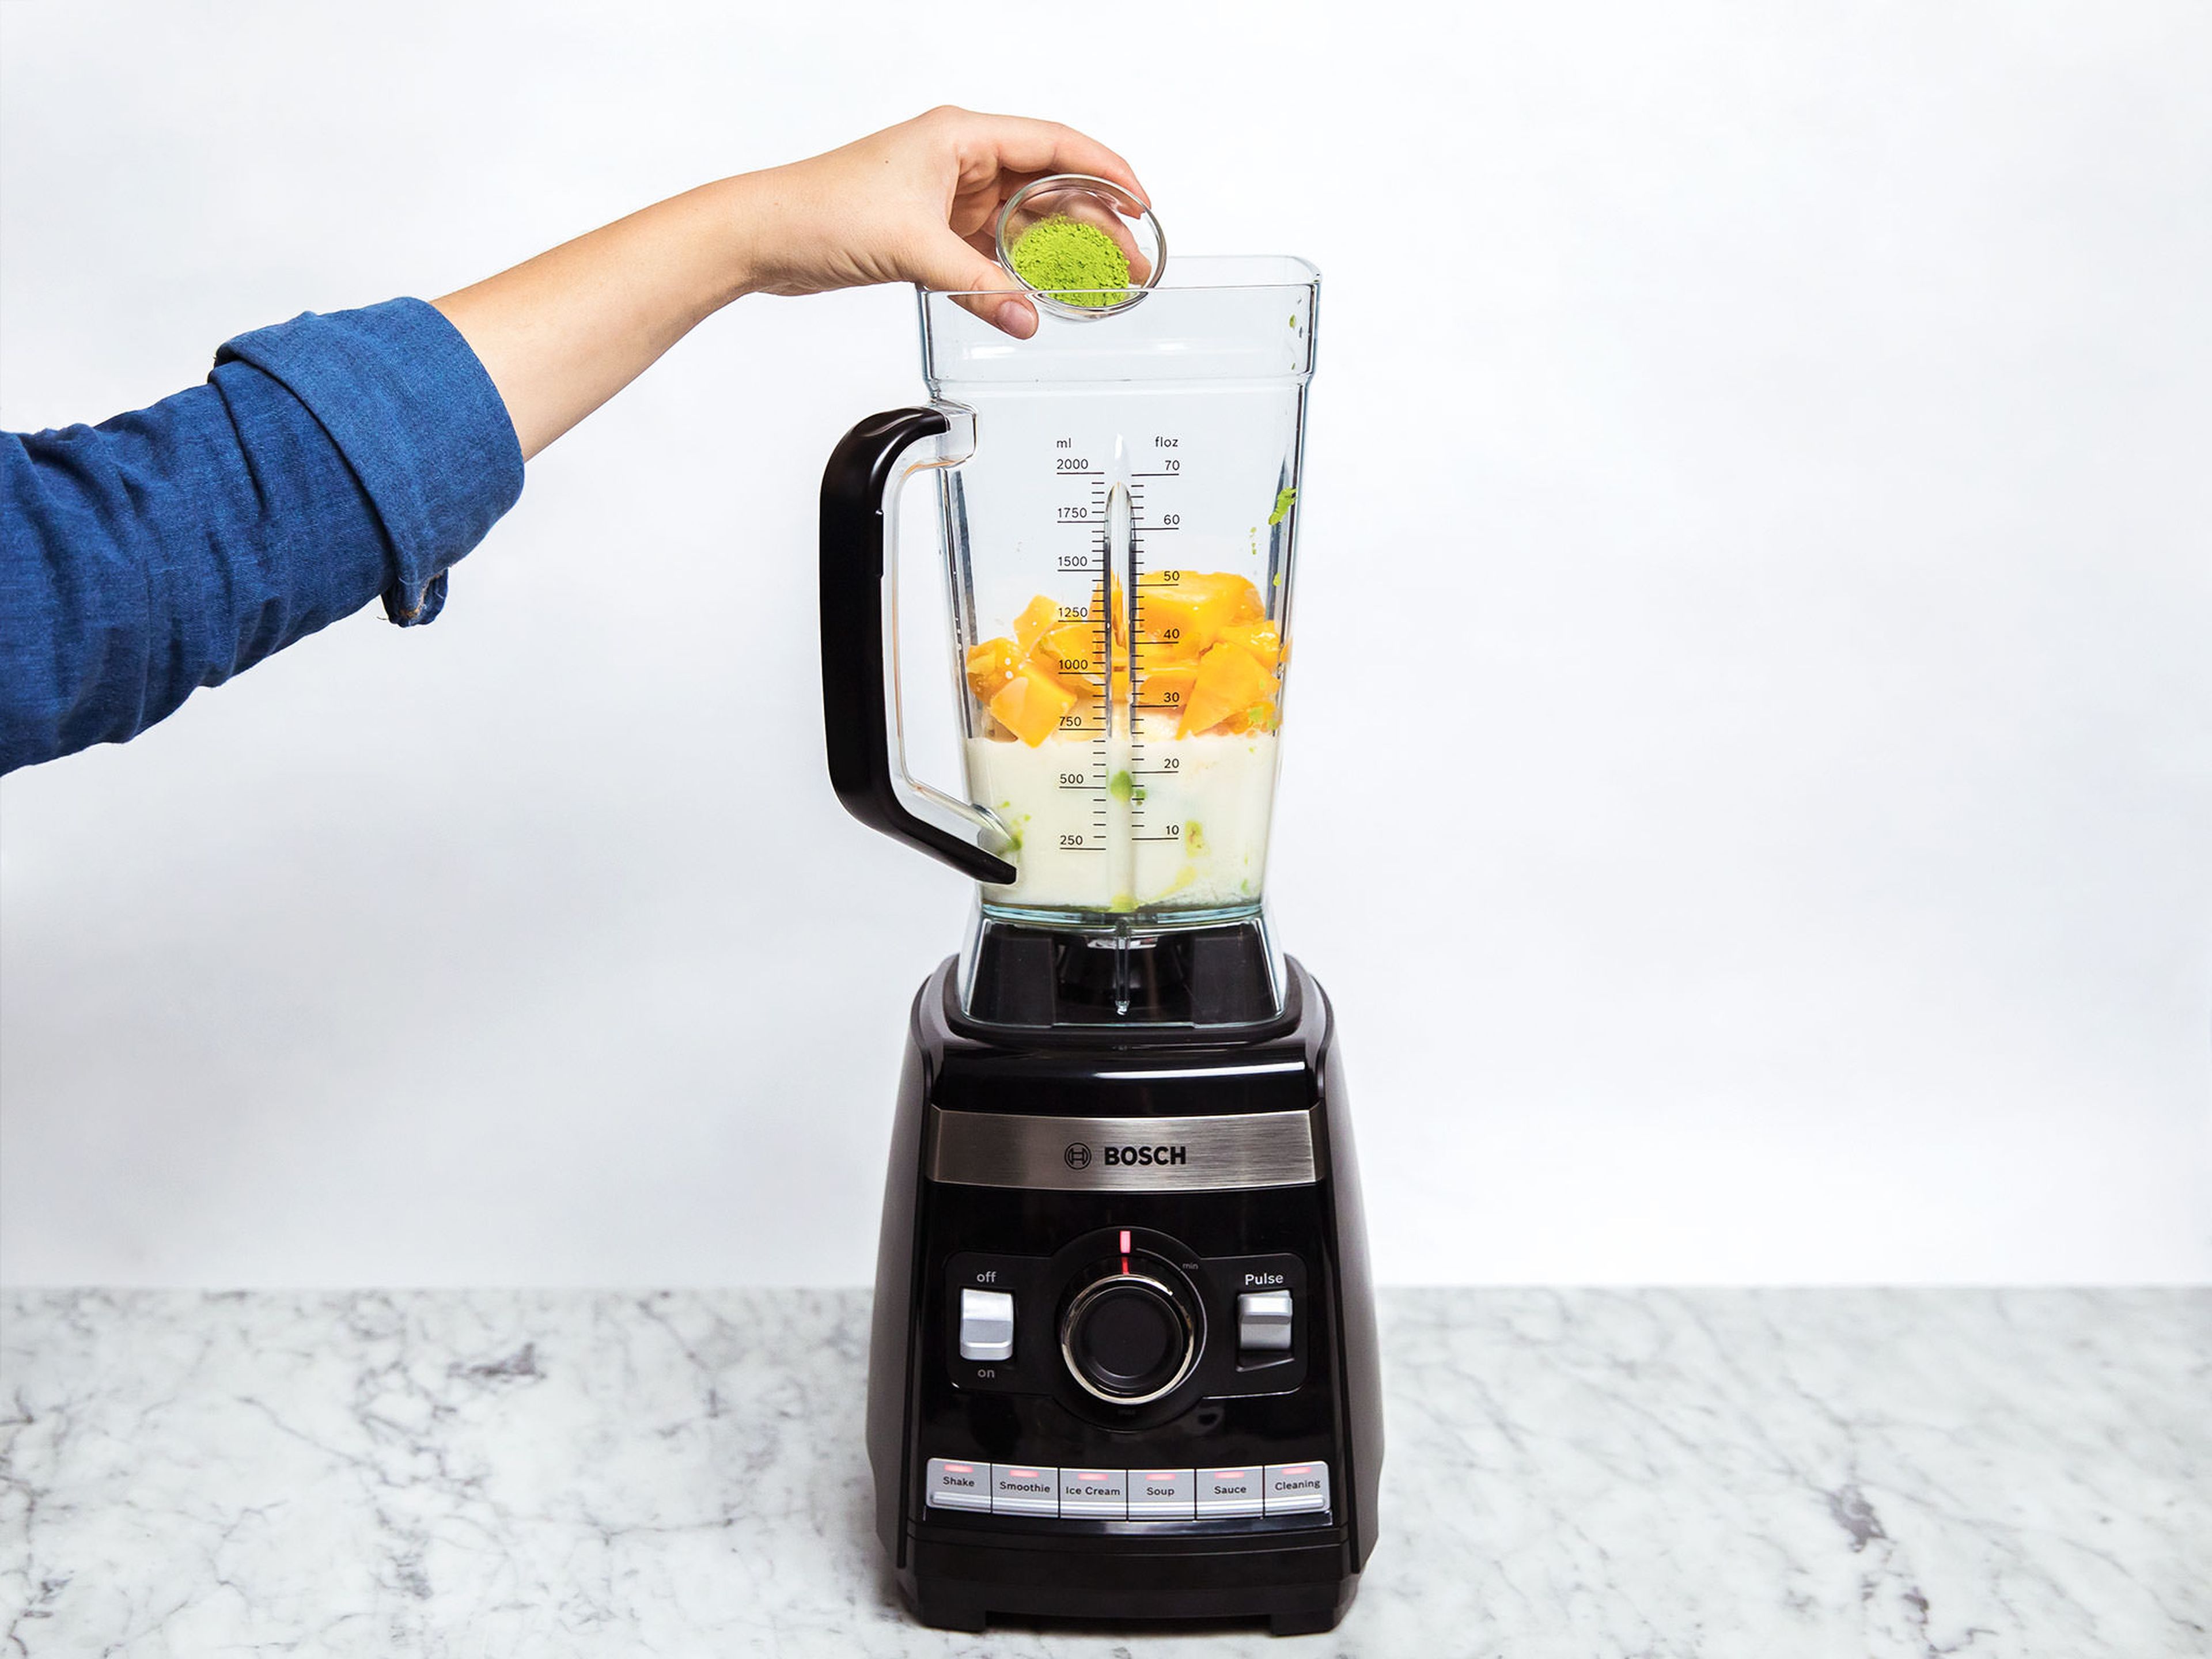 Halve the avocado and remove the seed. Scoop the flesh of both halves into the blender. Peel and add bananas to the blender with the frozen mango, freshly squeezed lime juice, agave nectar, almond milk, and matcha powder. Blend until smooth (using your blender's smoothie function).